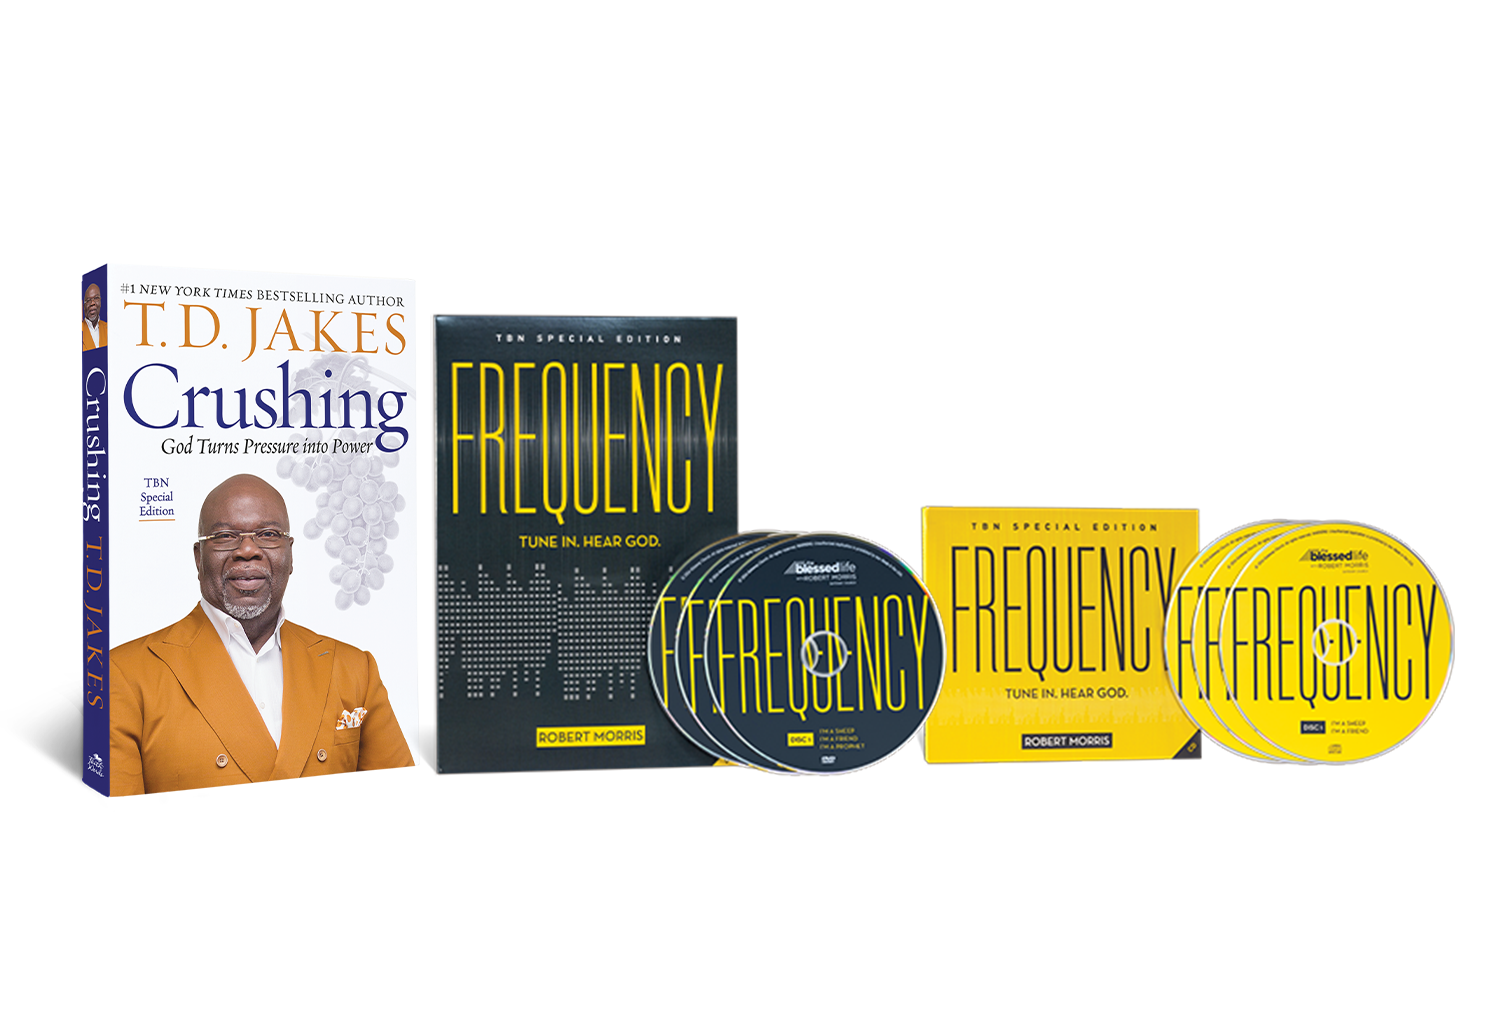 Receive Frequency on 4 CDs and Frequency on 3 DVDs from Robert Morris, and Crushing from Bishop T.D. Jakes from TBN